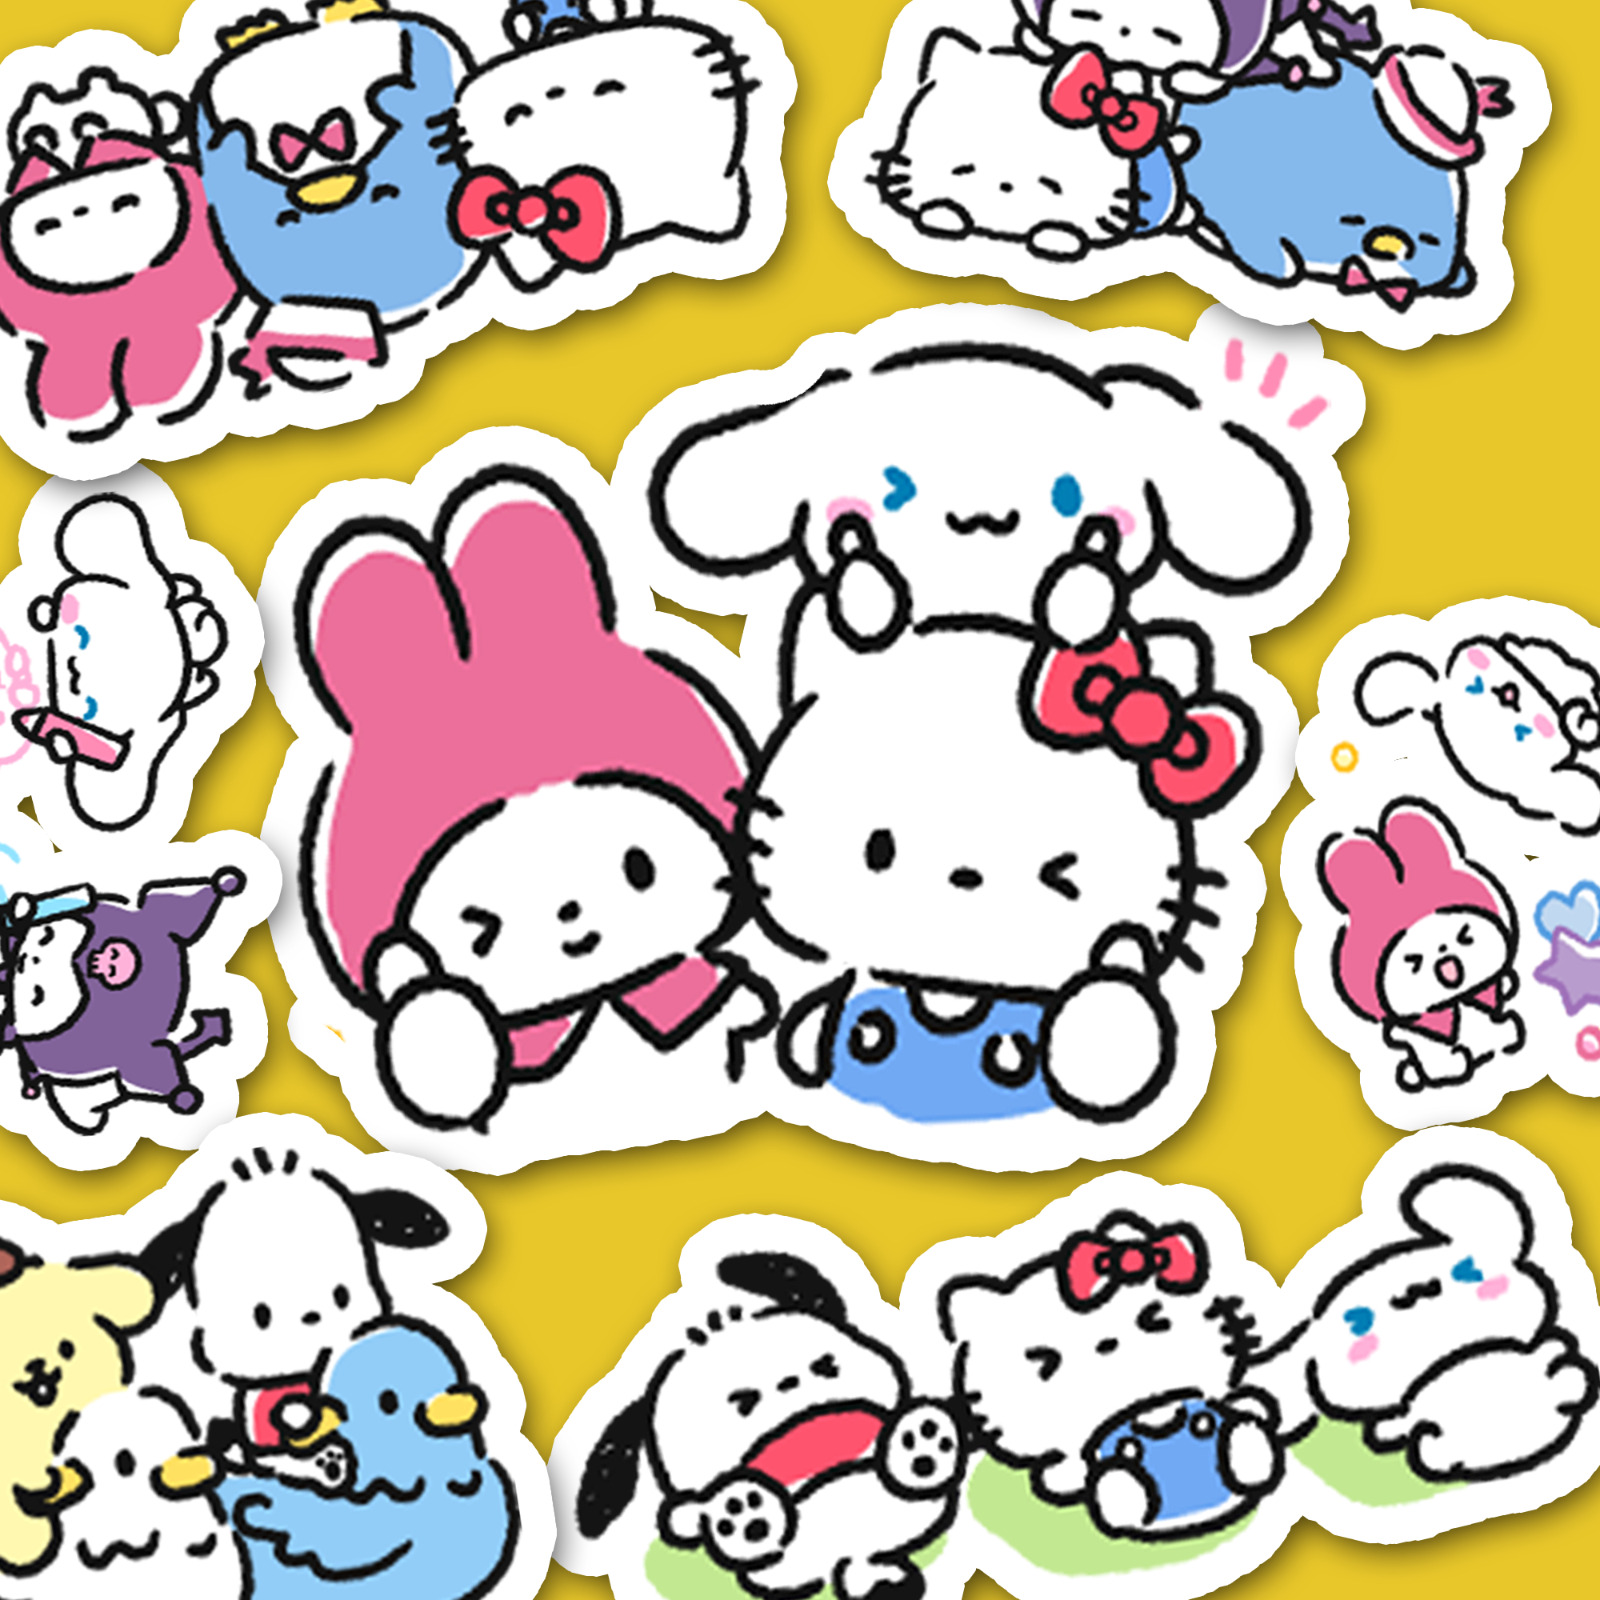 24 Sanrio Family Stickers, Journal Stickers, Kawaii Stickers, Scrapbooking,  Cute - Simpson Advanced Chiropractic & Medical Center